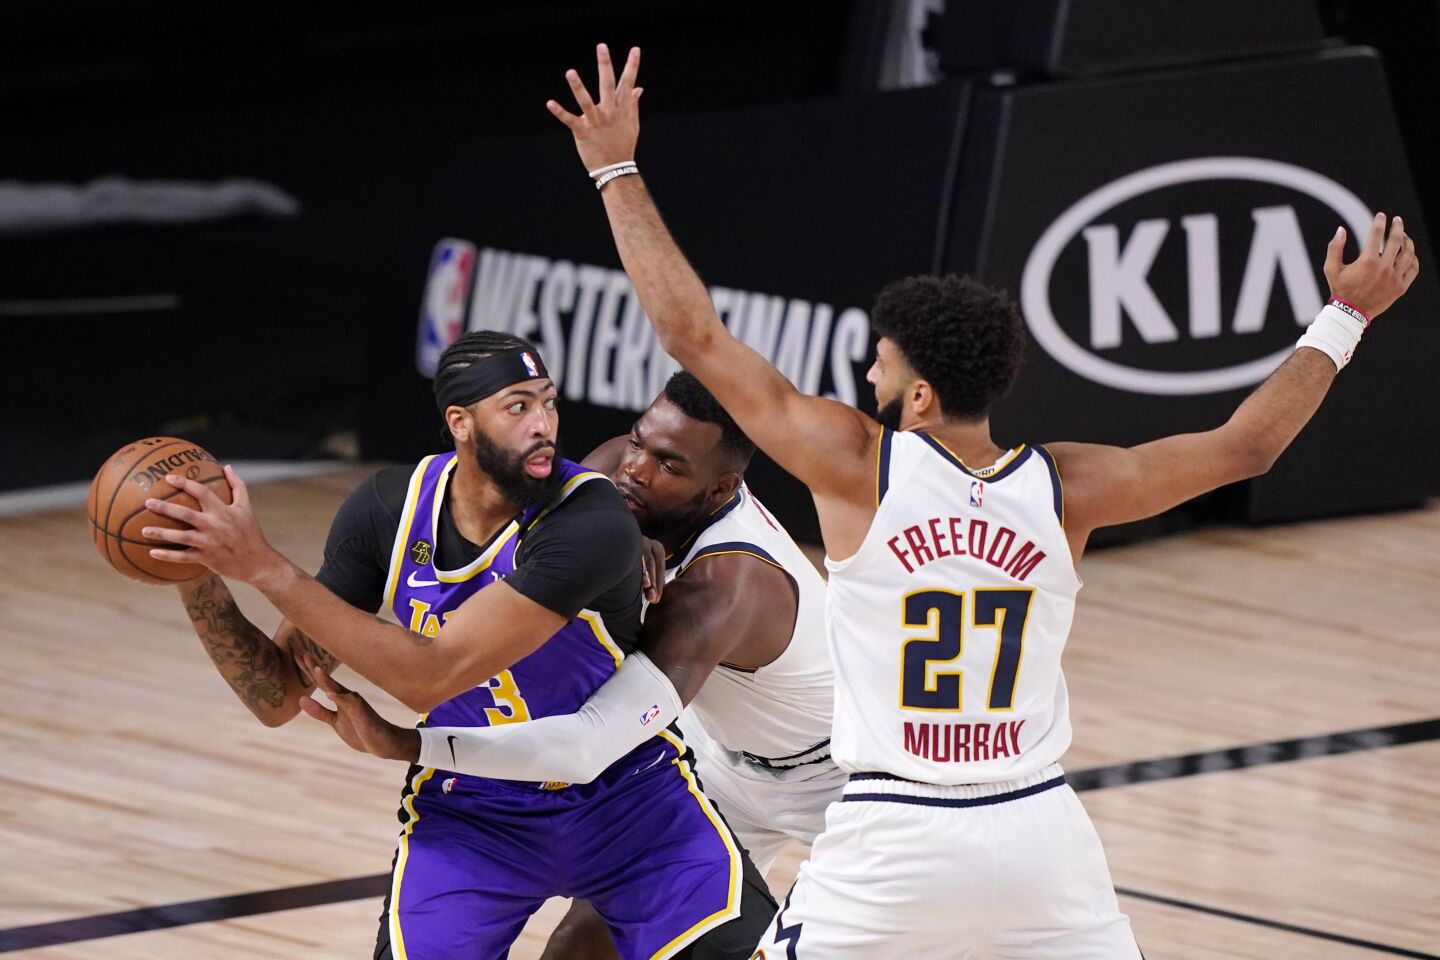 Lakers forward Anthony Davis faces the double-team defense of Denver's Paul Millsap and Jamal Murray.